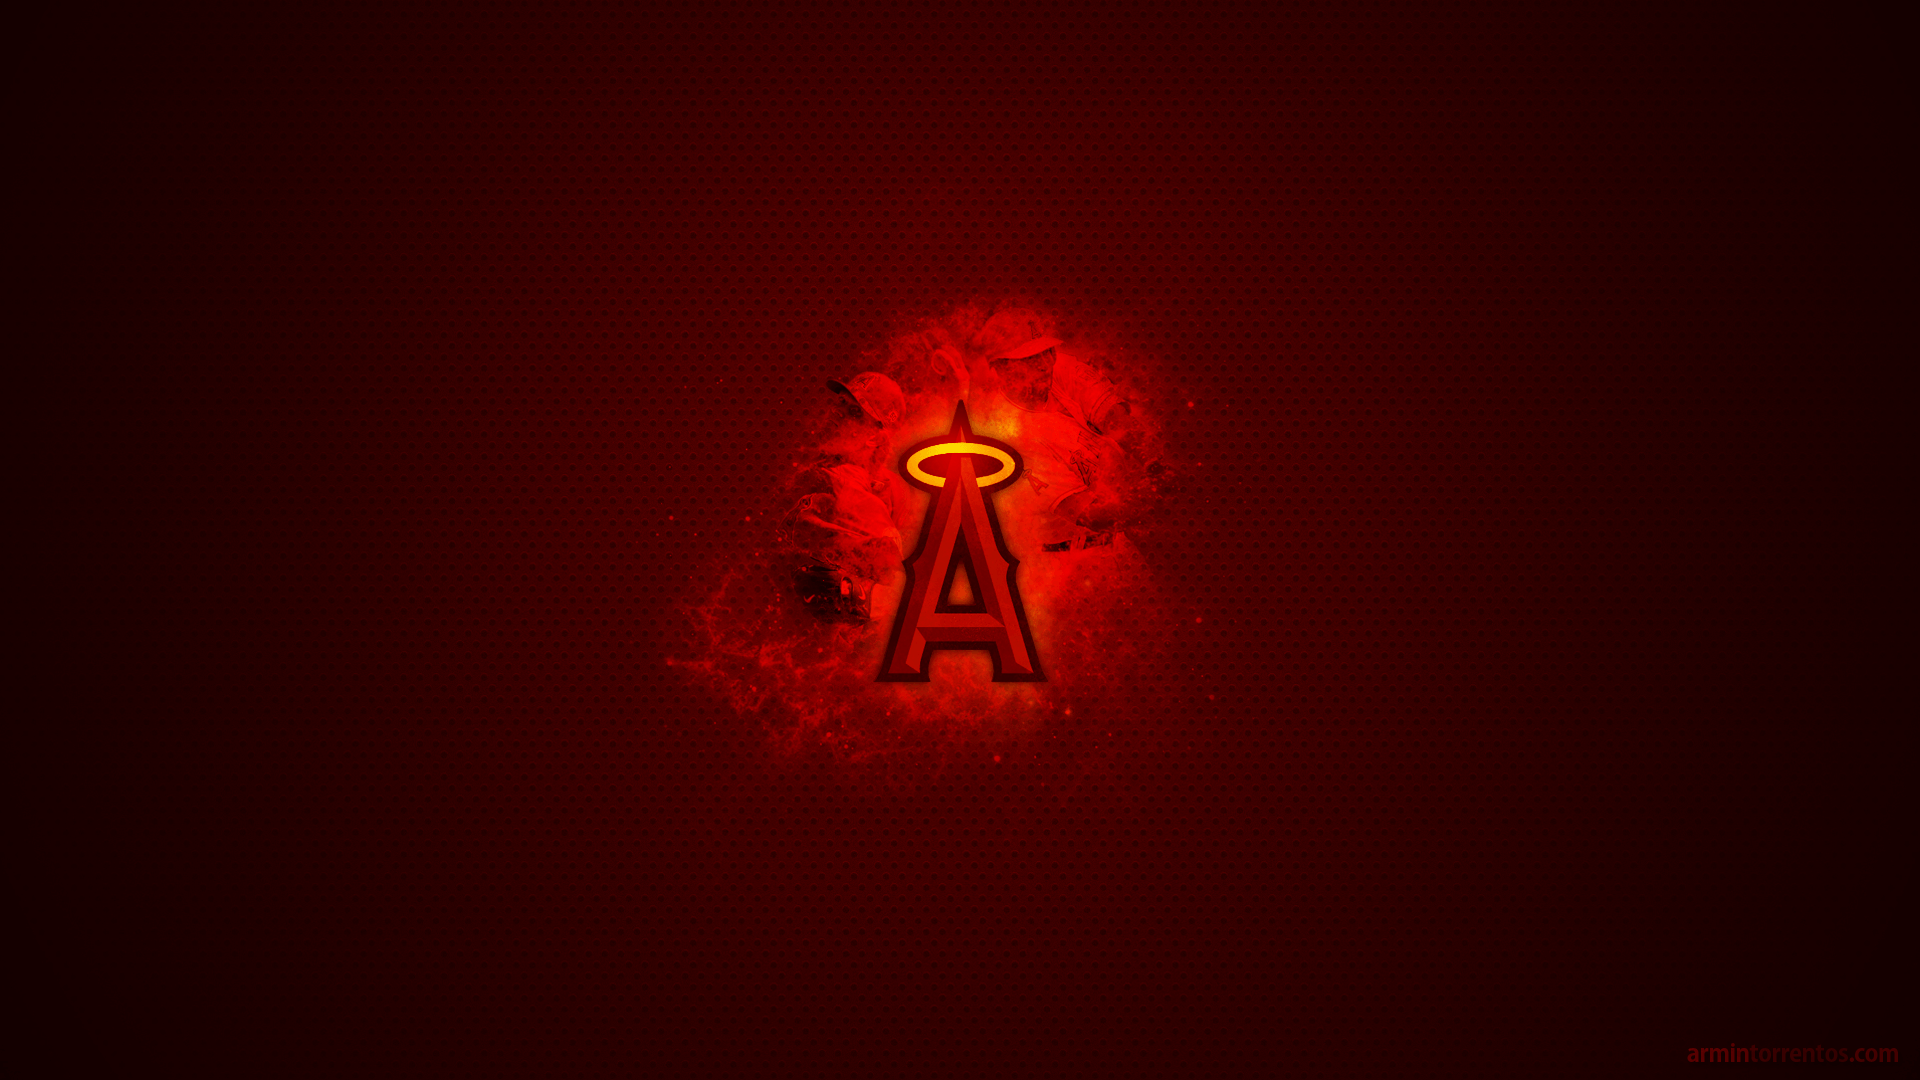 Los Angeles Angels Of Anaheim Wallpapers